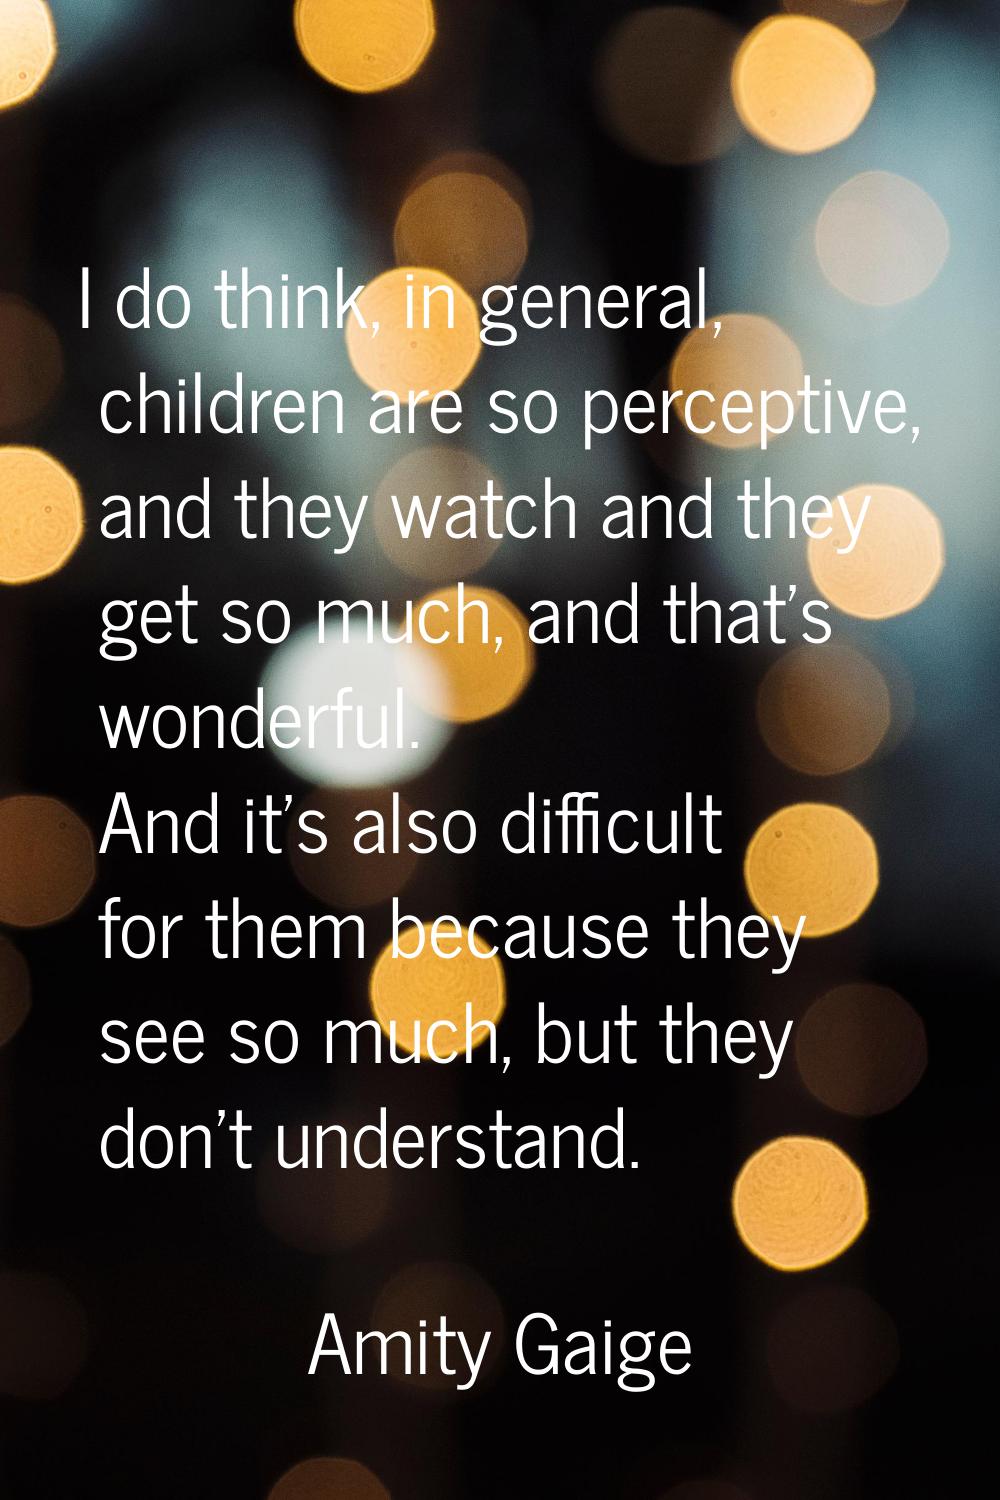 I do think, in general, children are so perceptive, and they watch and they get so much, and that's